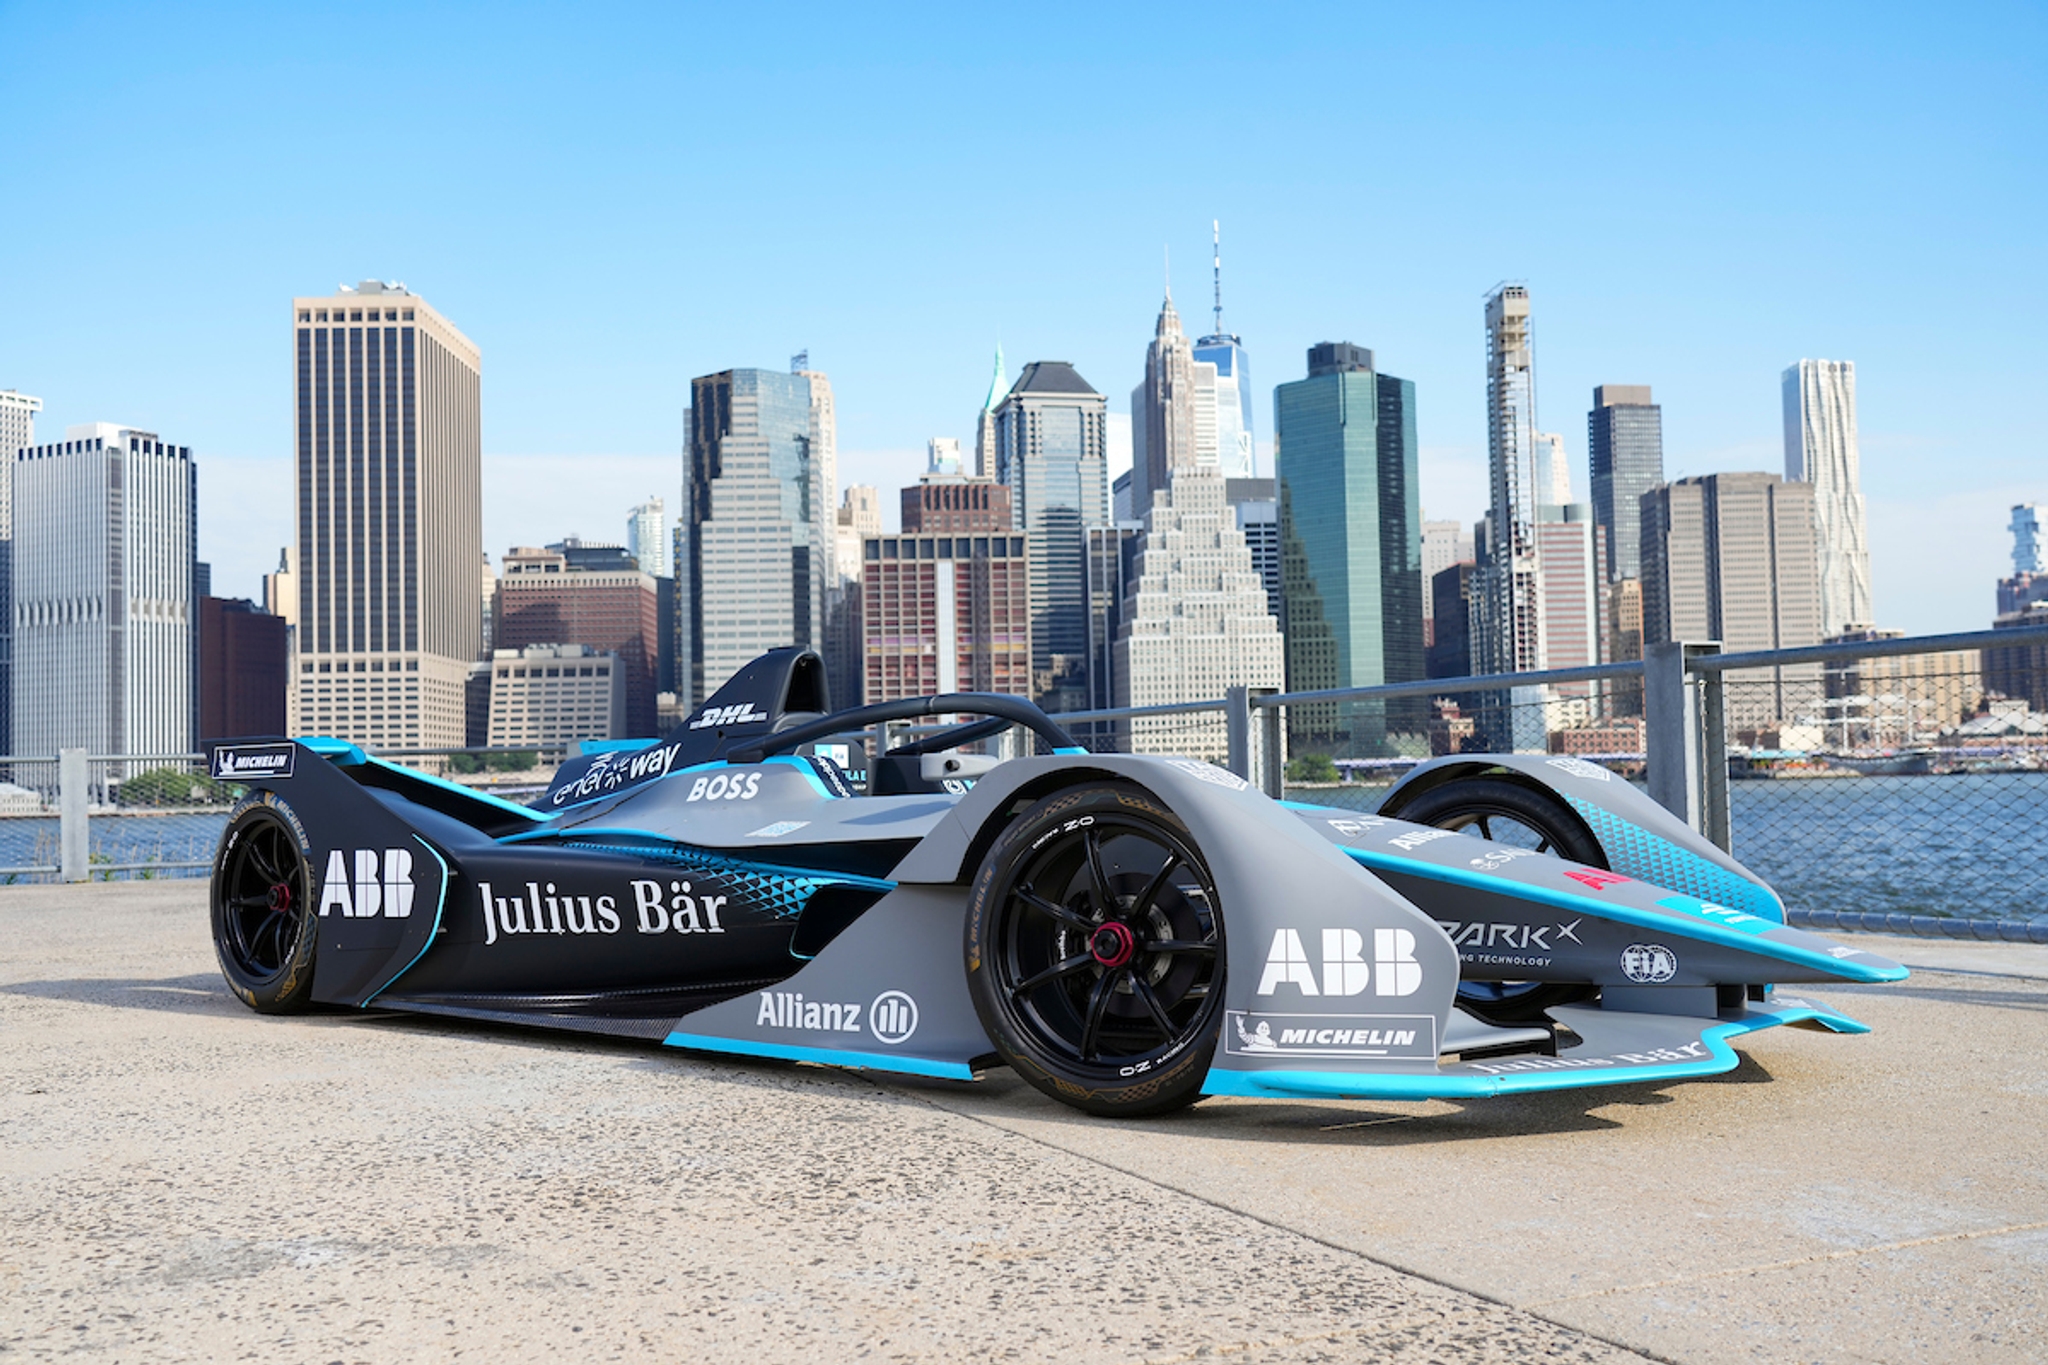 A big horsepower jump and more changes to come for Formula E in 2023